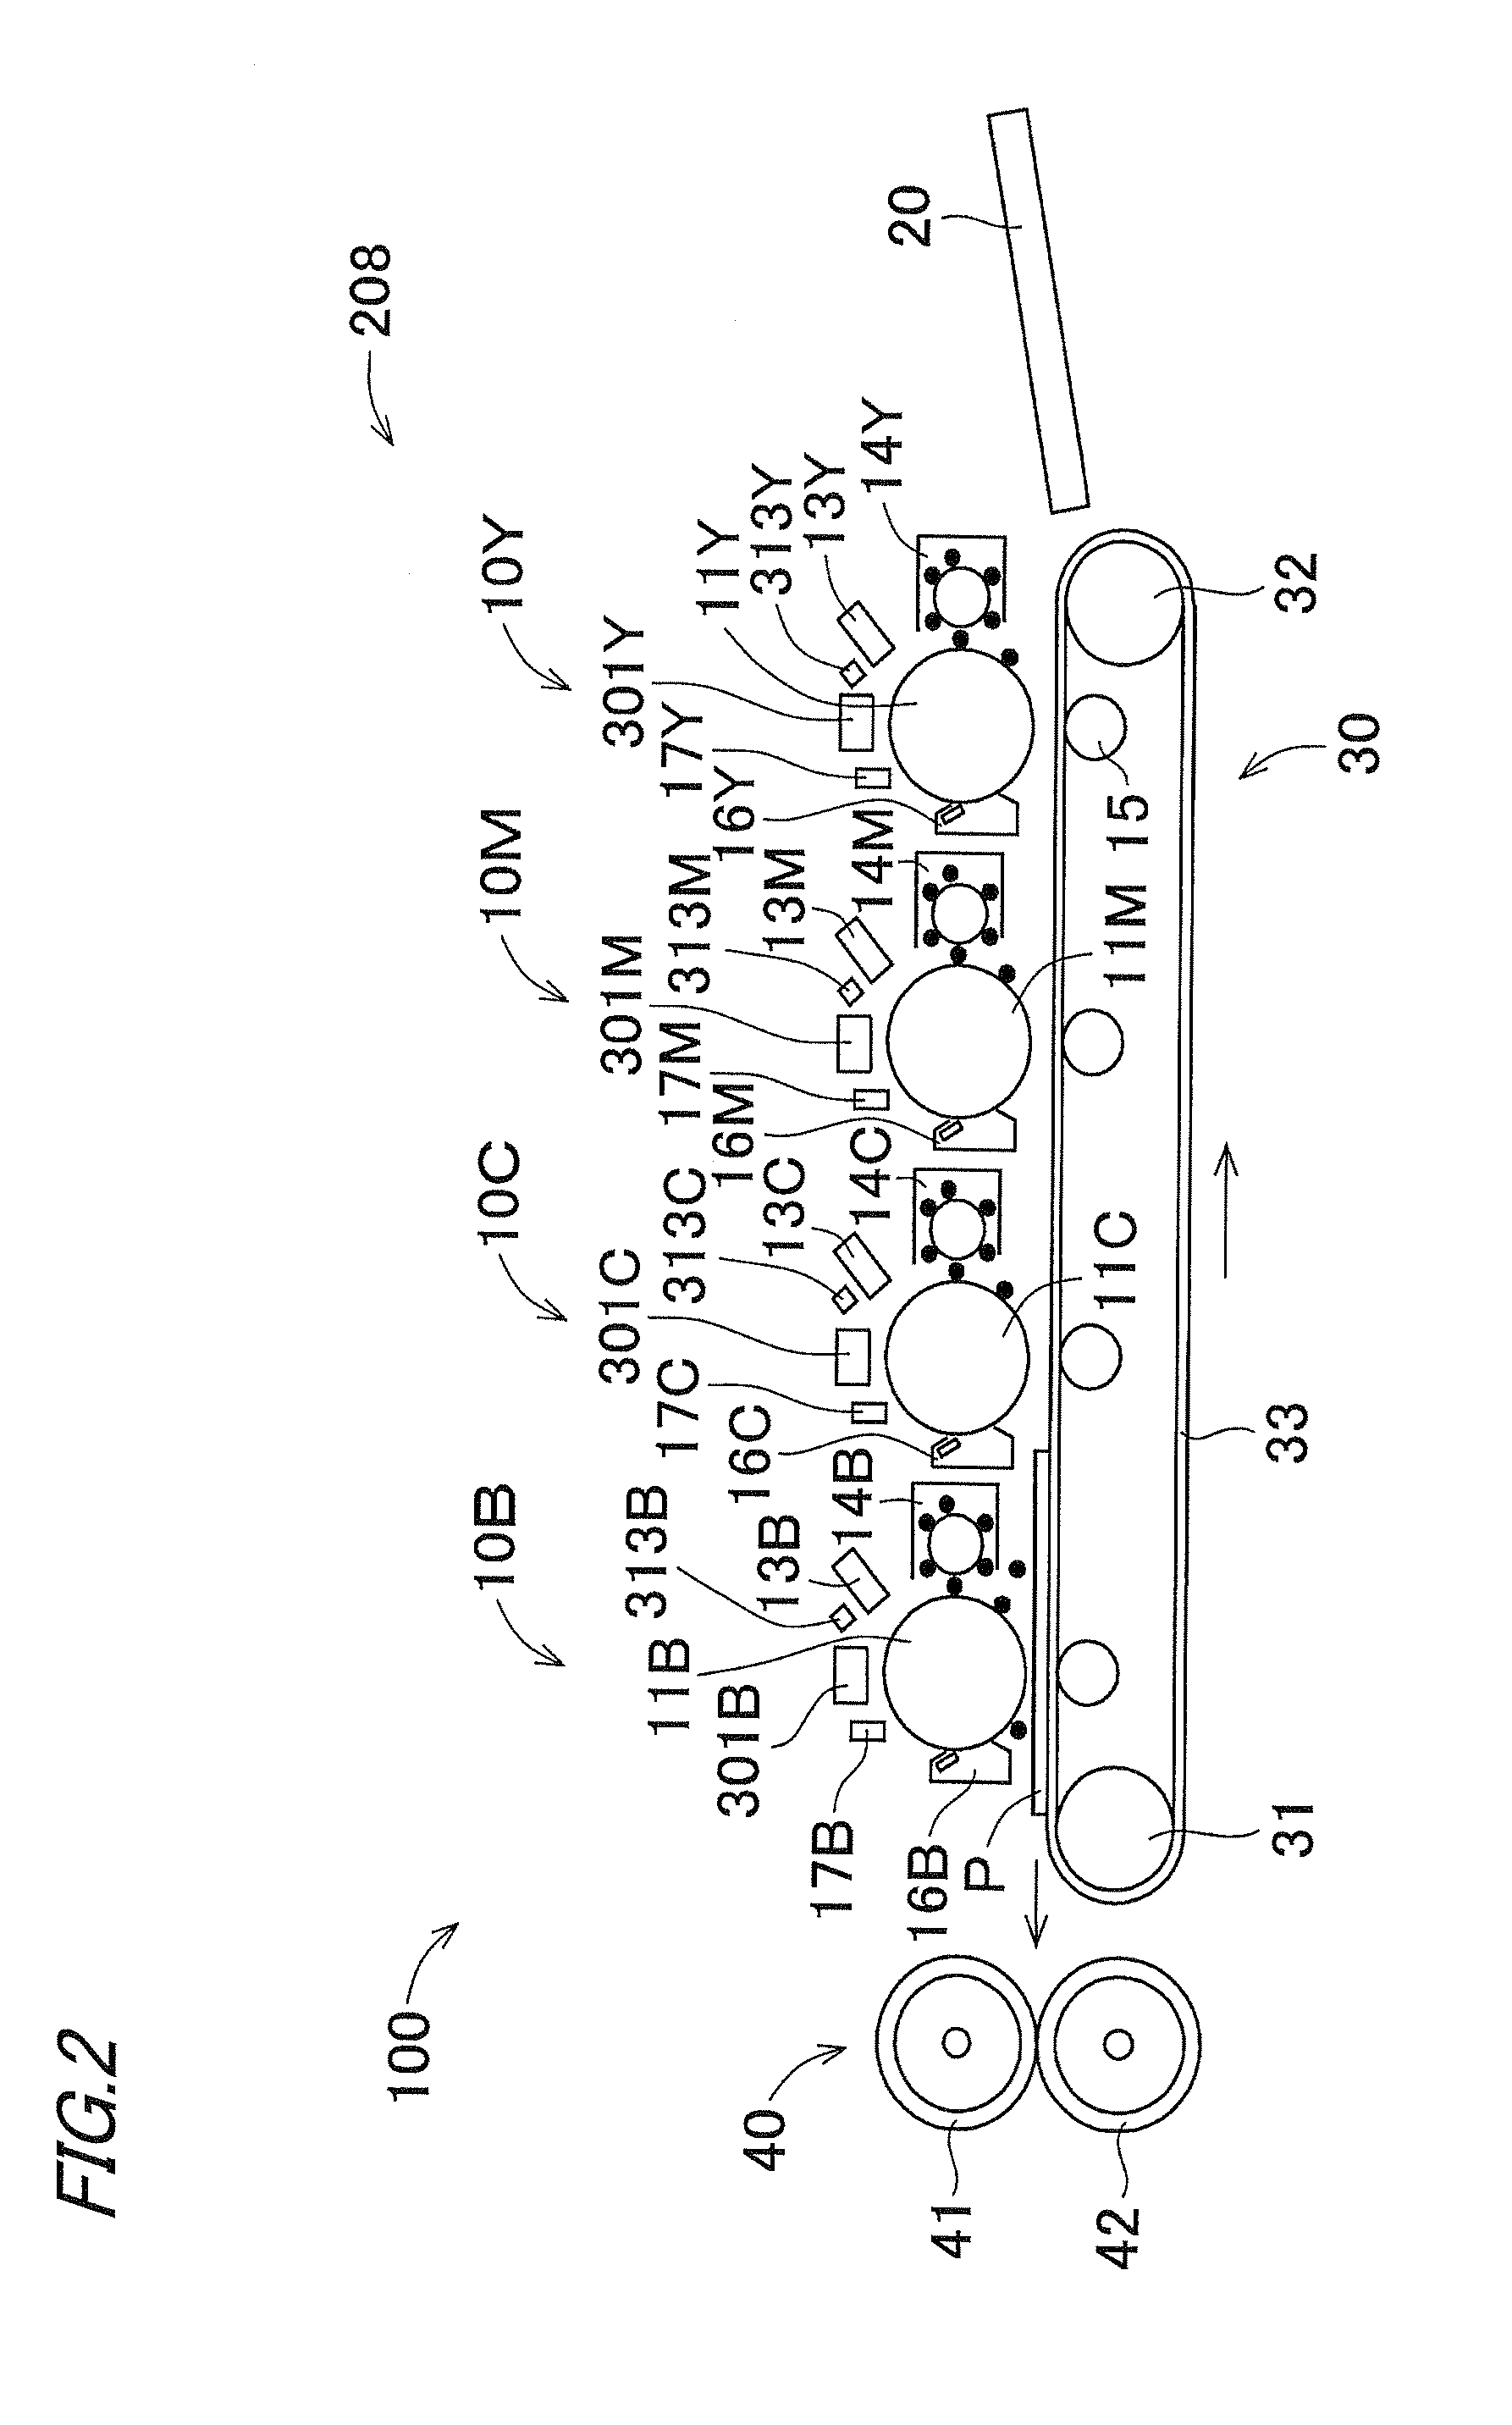 Image forming apparatus and cleaning control method